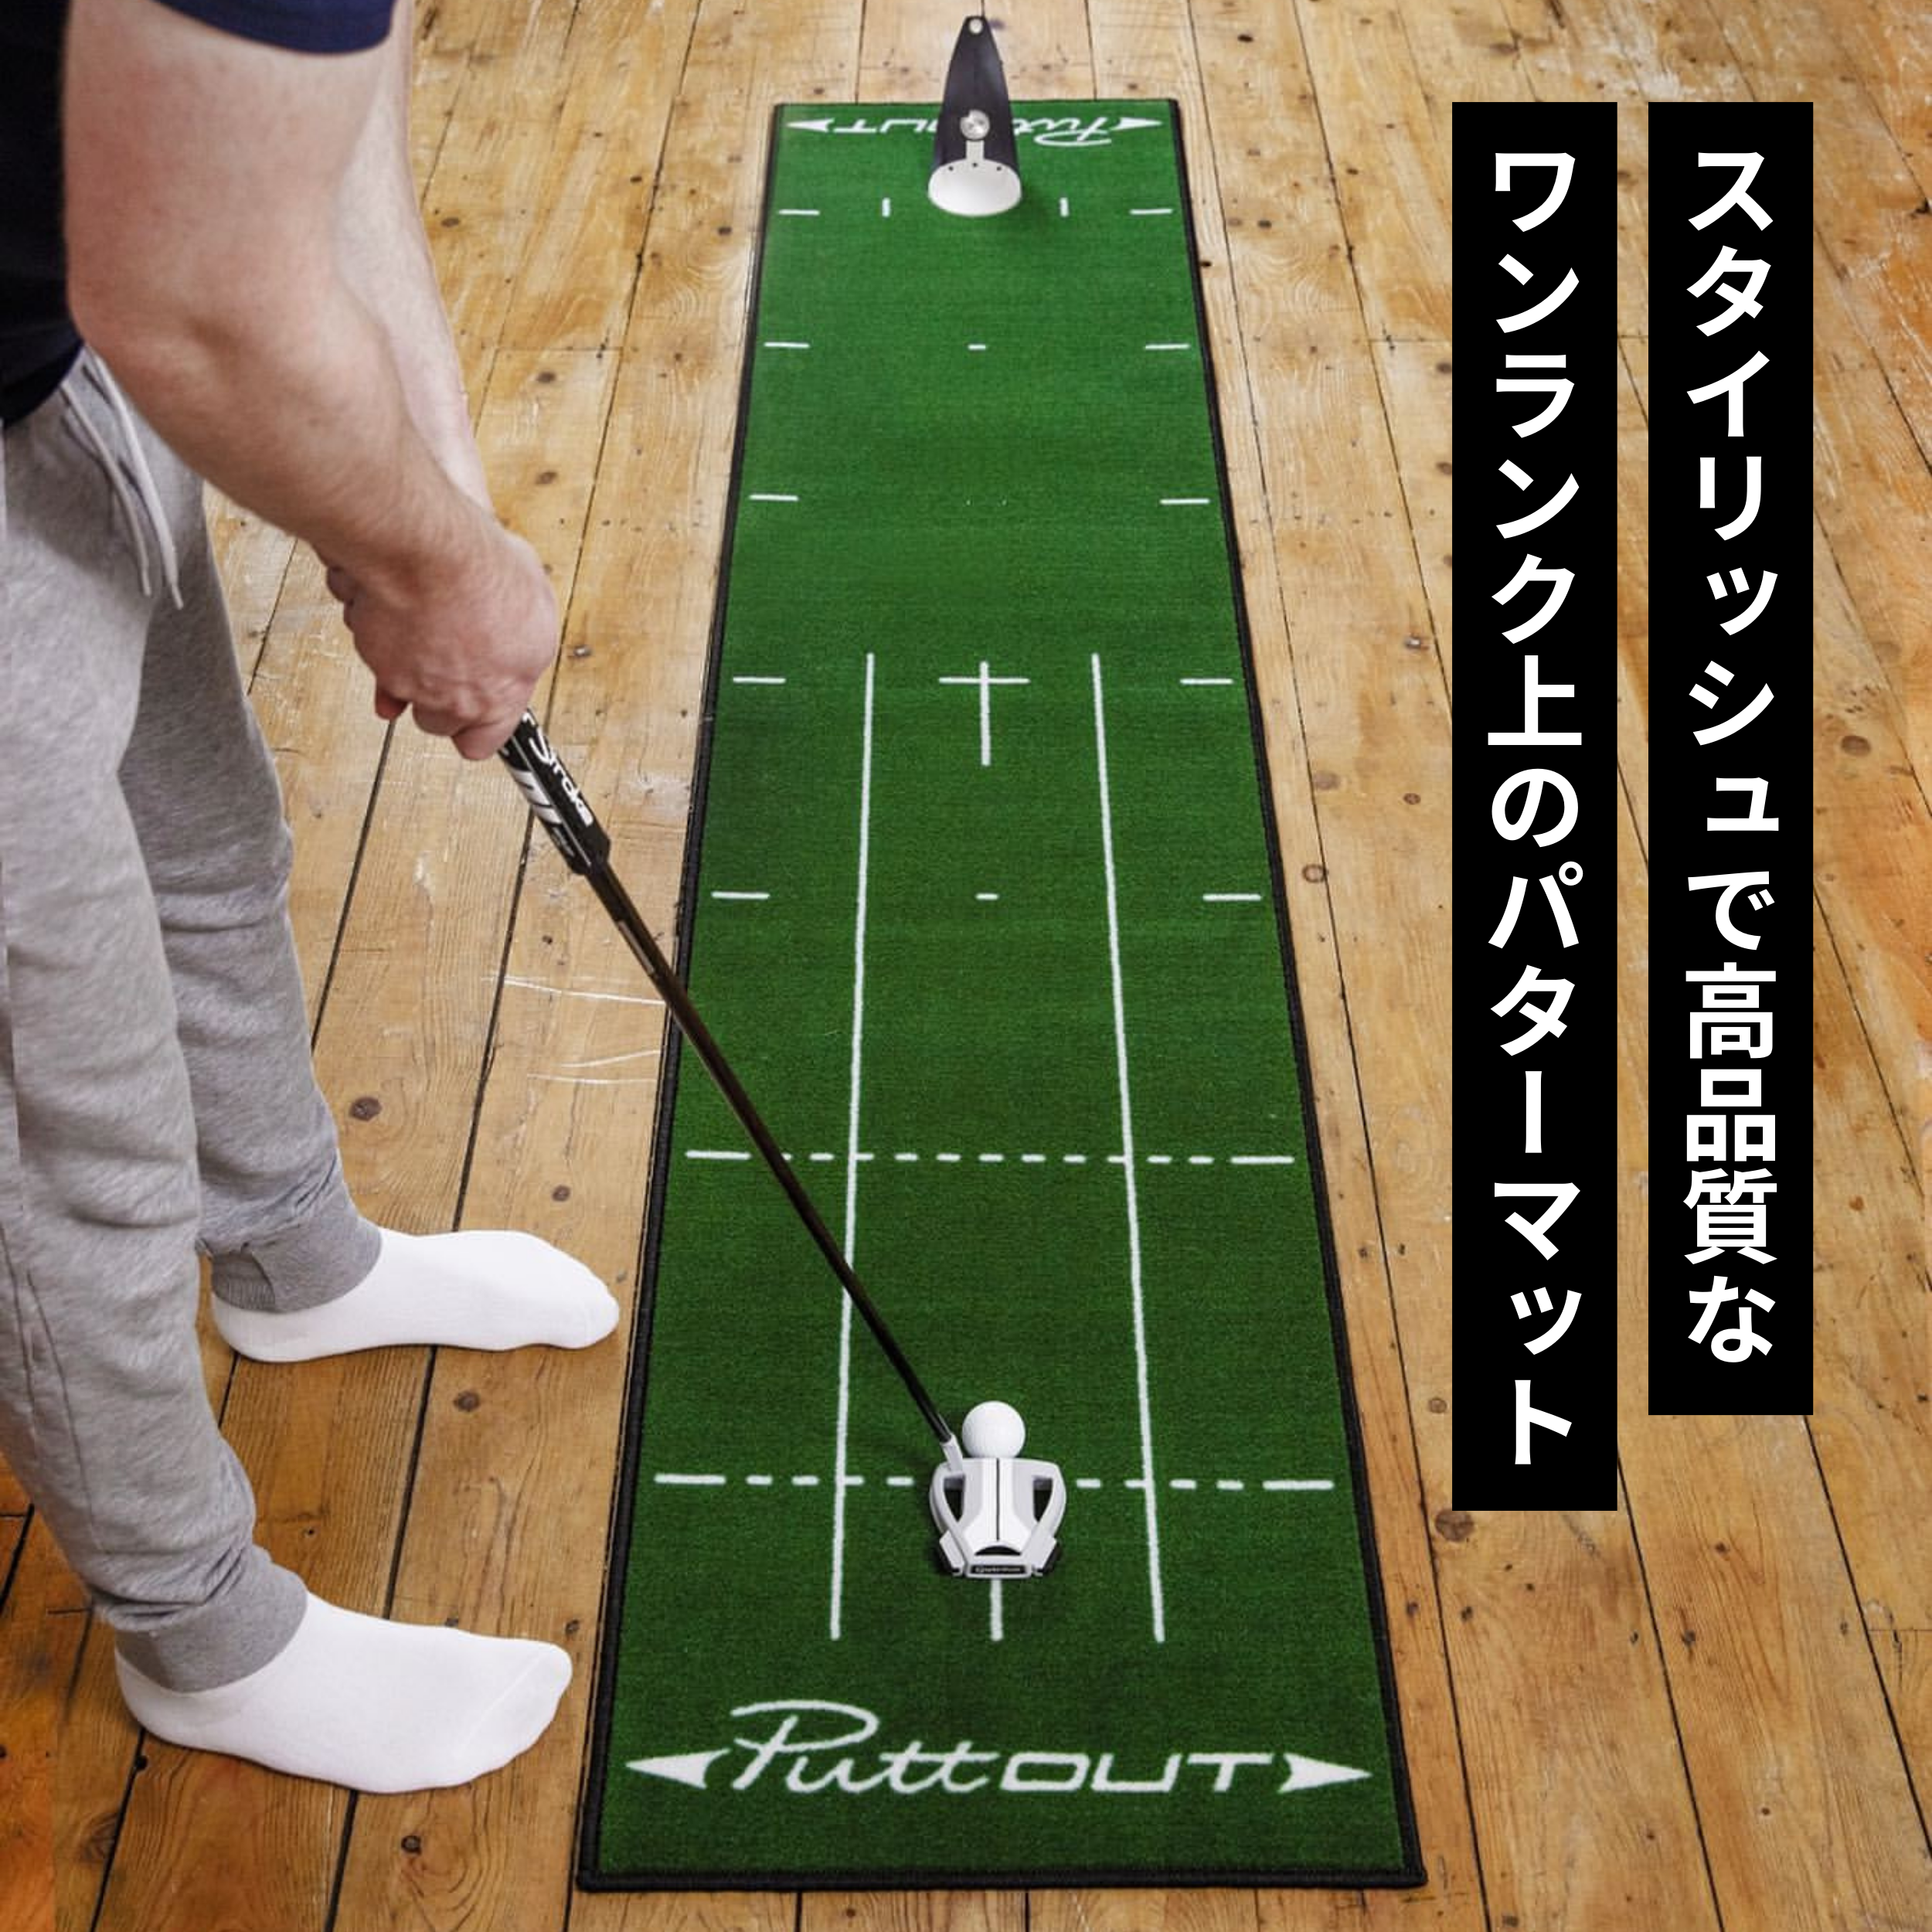 PuttOut パター練習器具 4点セット